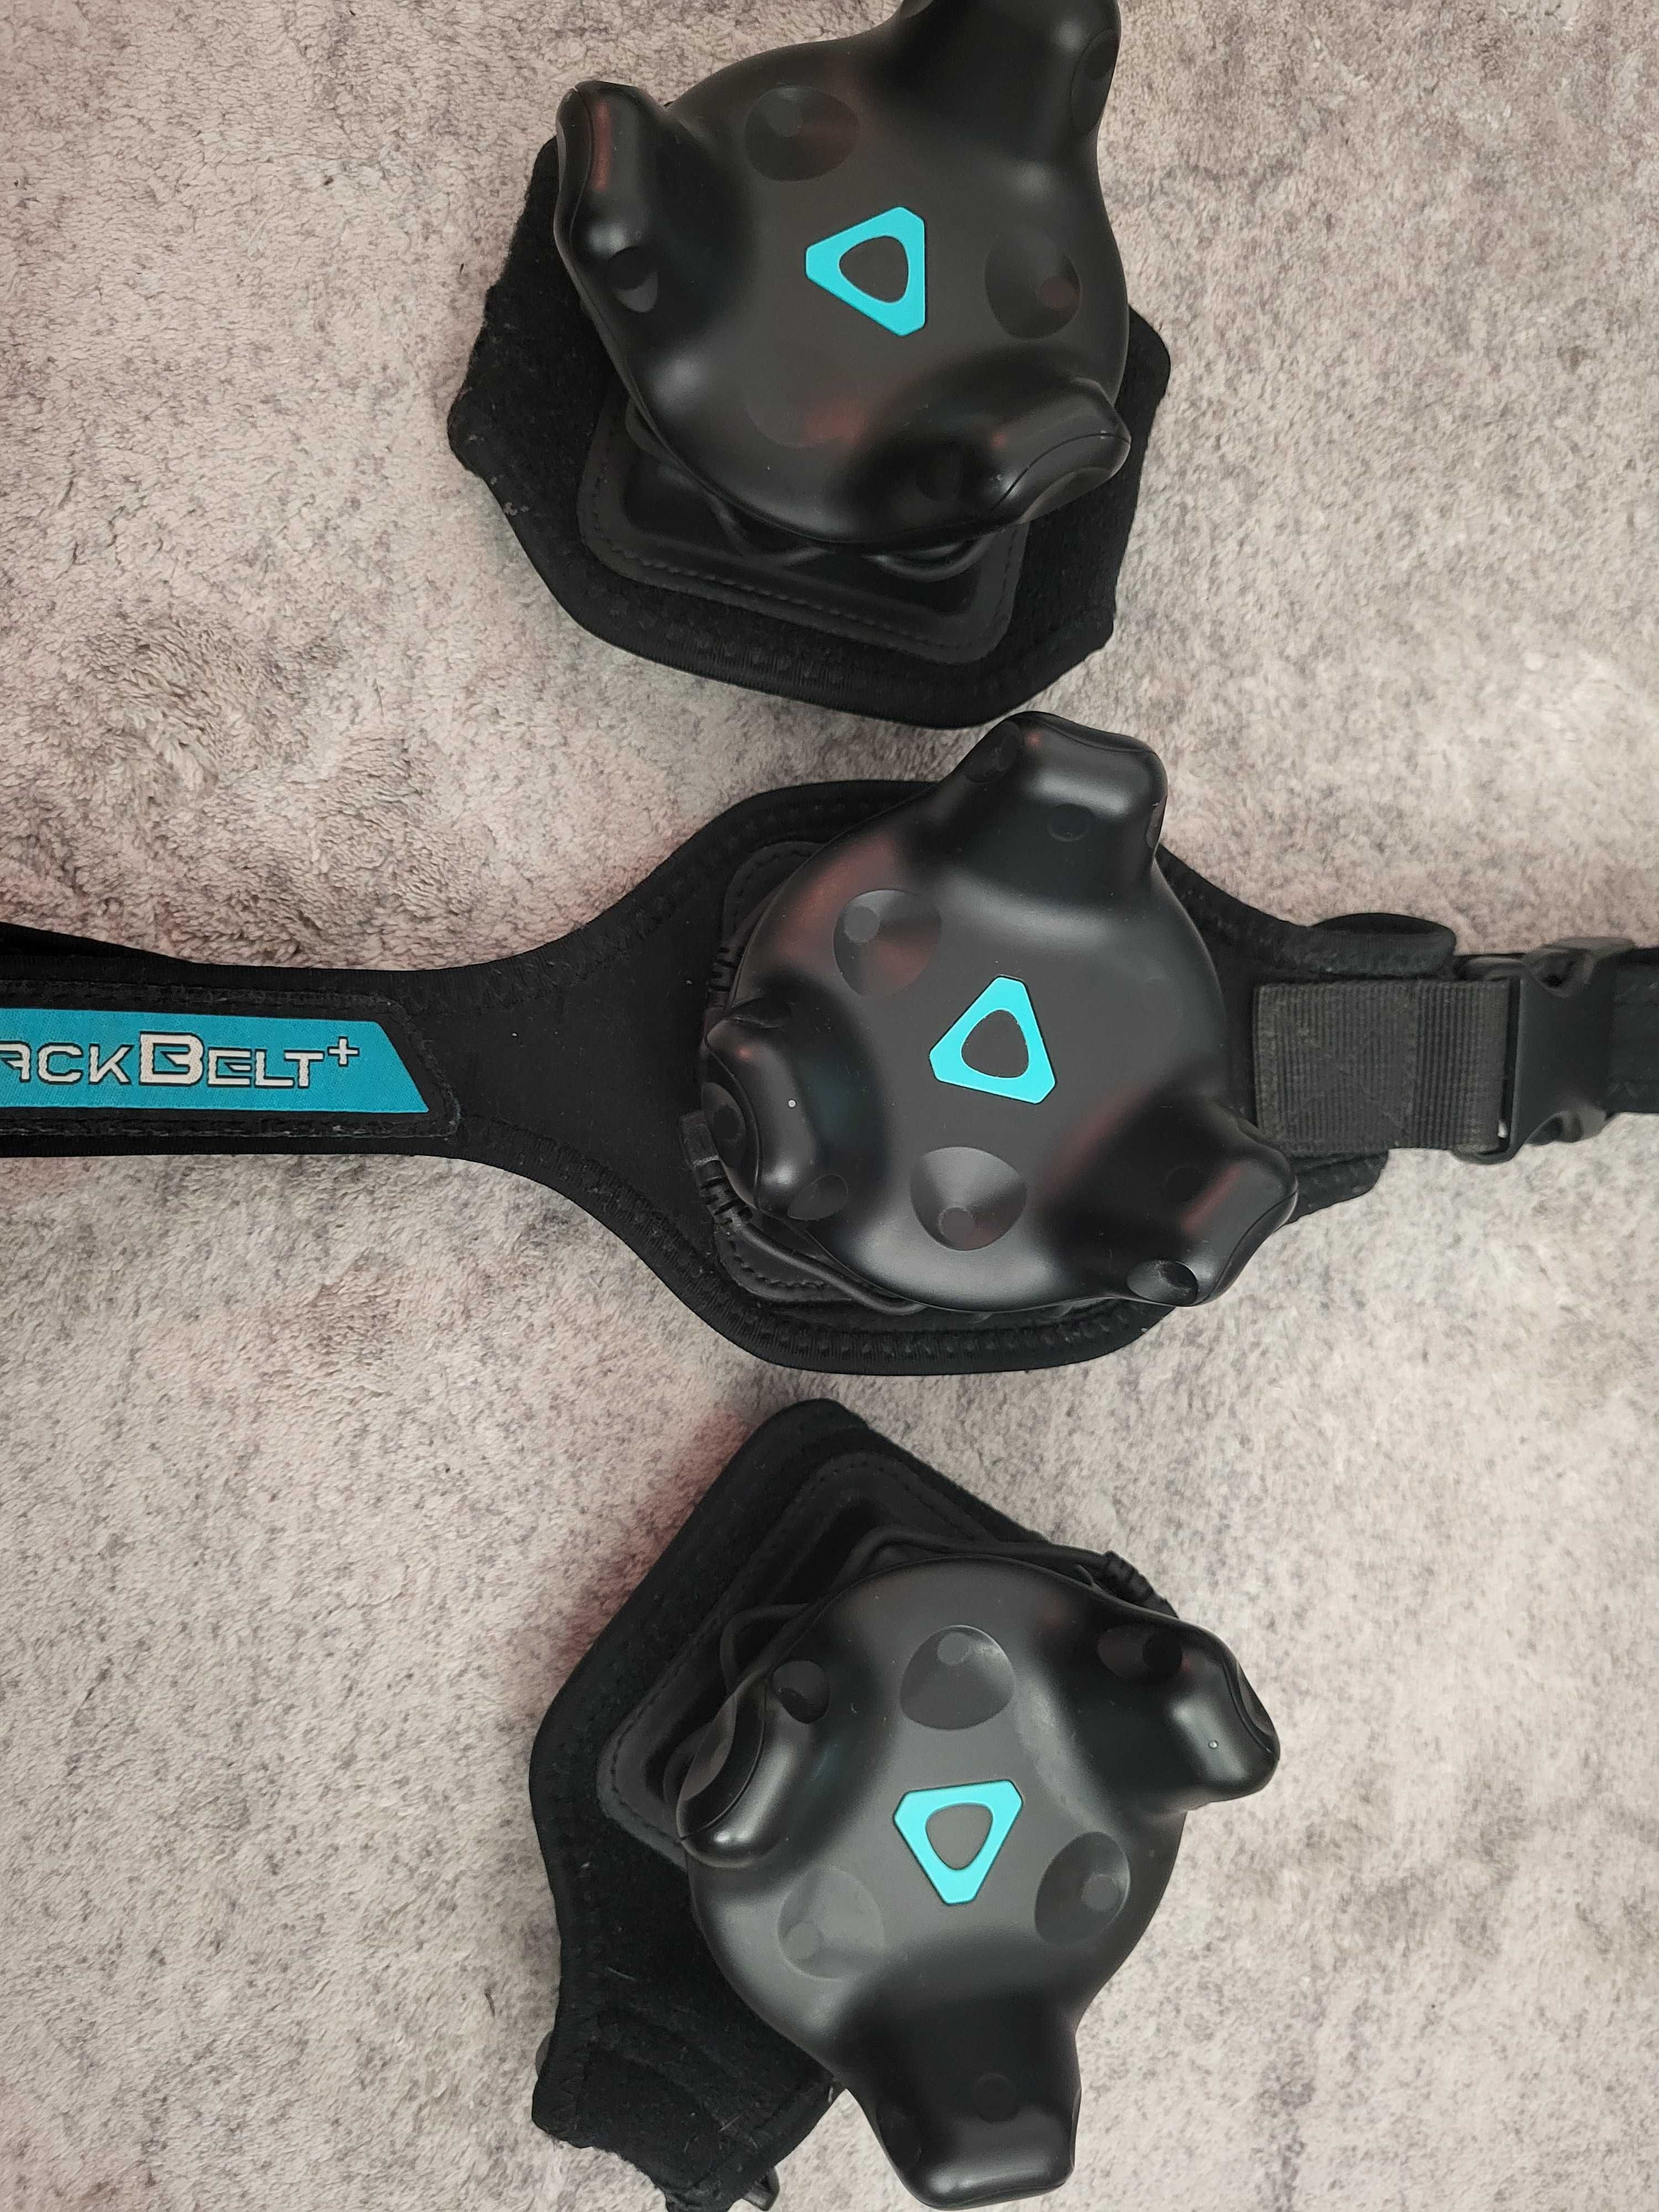 3x Vive Tracker 2.0 + Rebuff Reality Straps and Belt